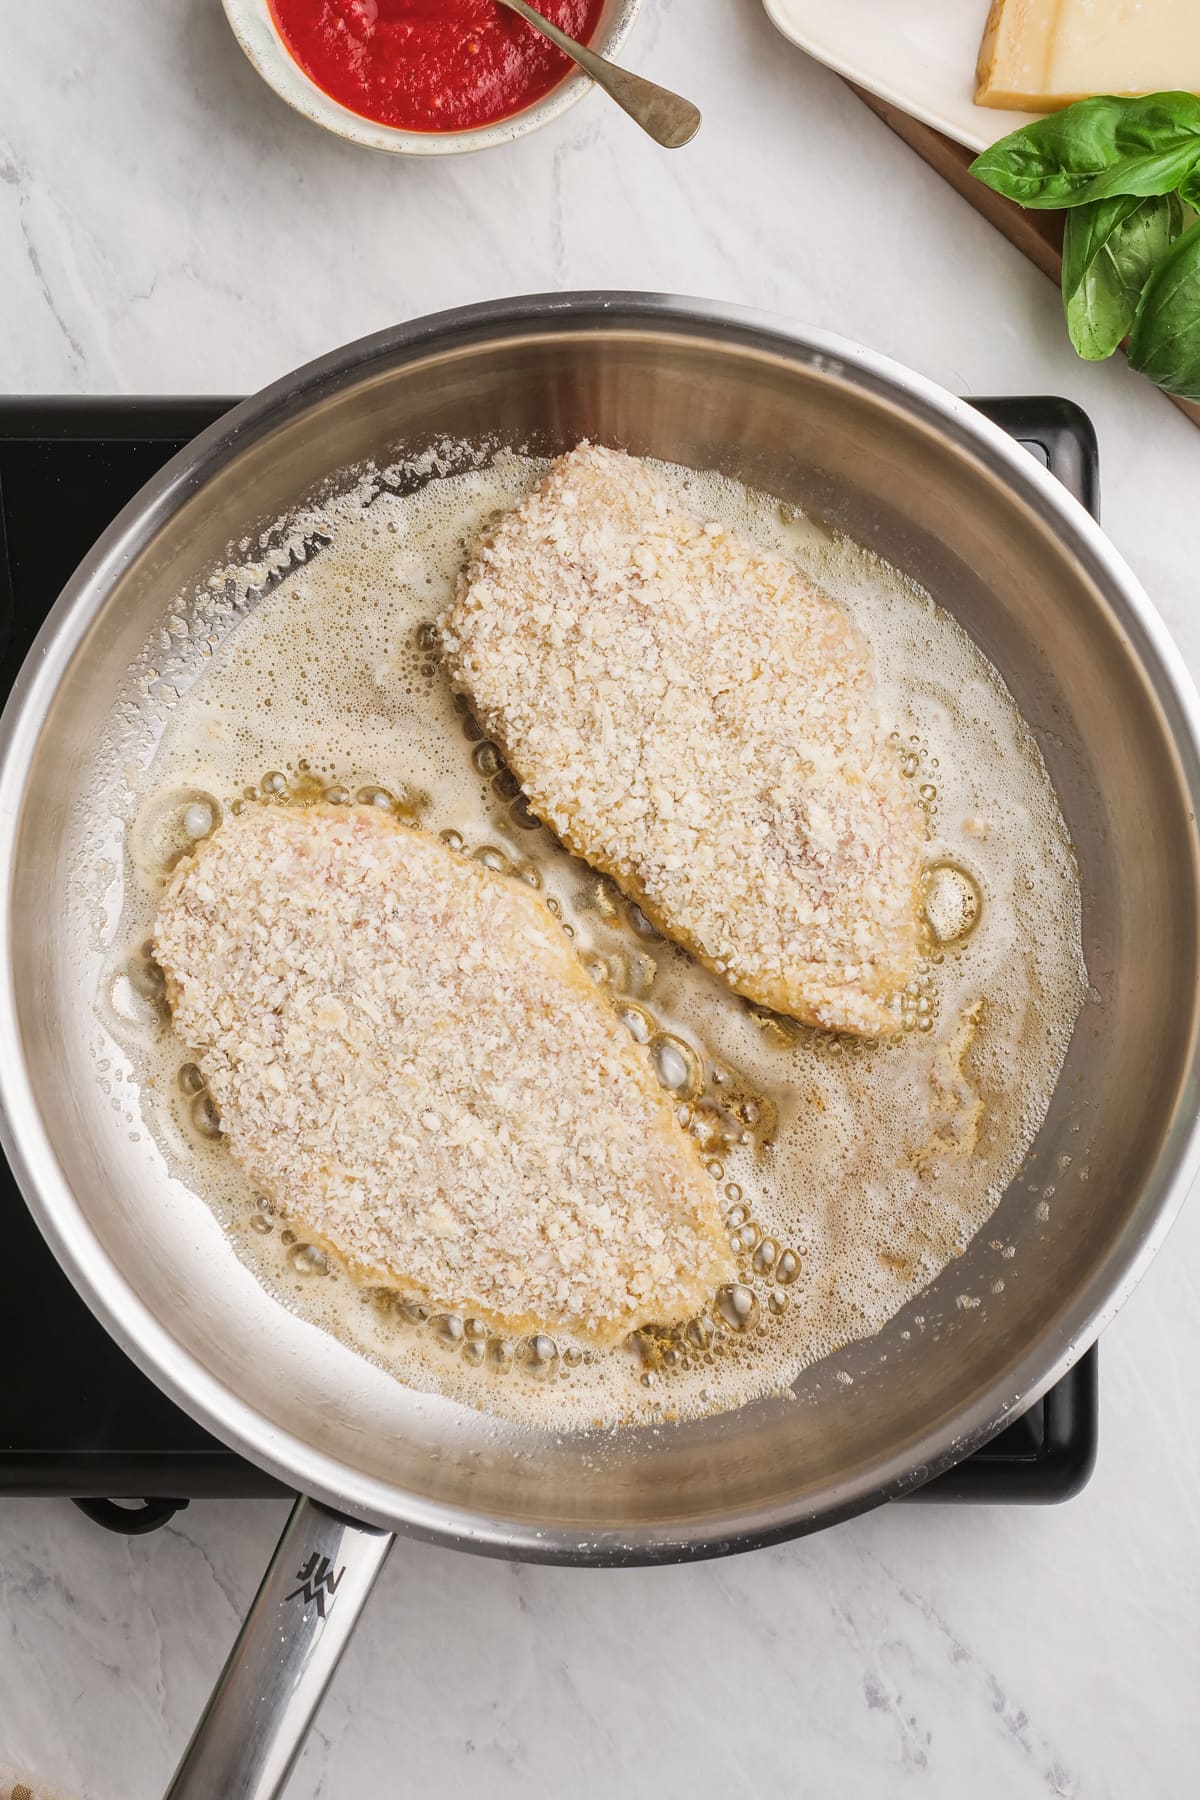 chicken breast frying in a hot skillet